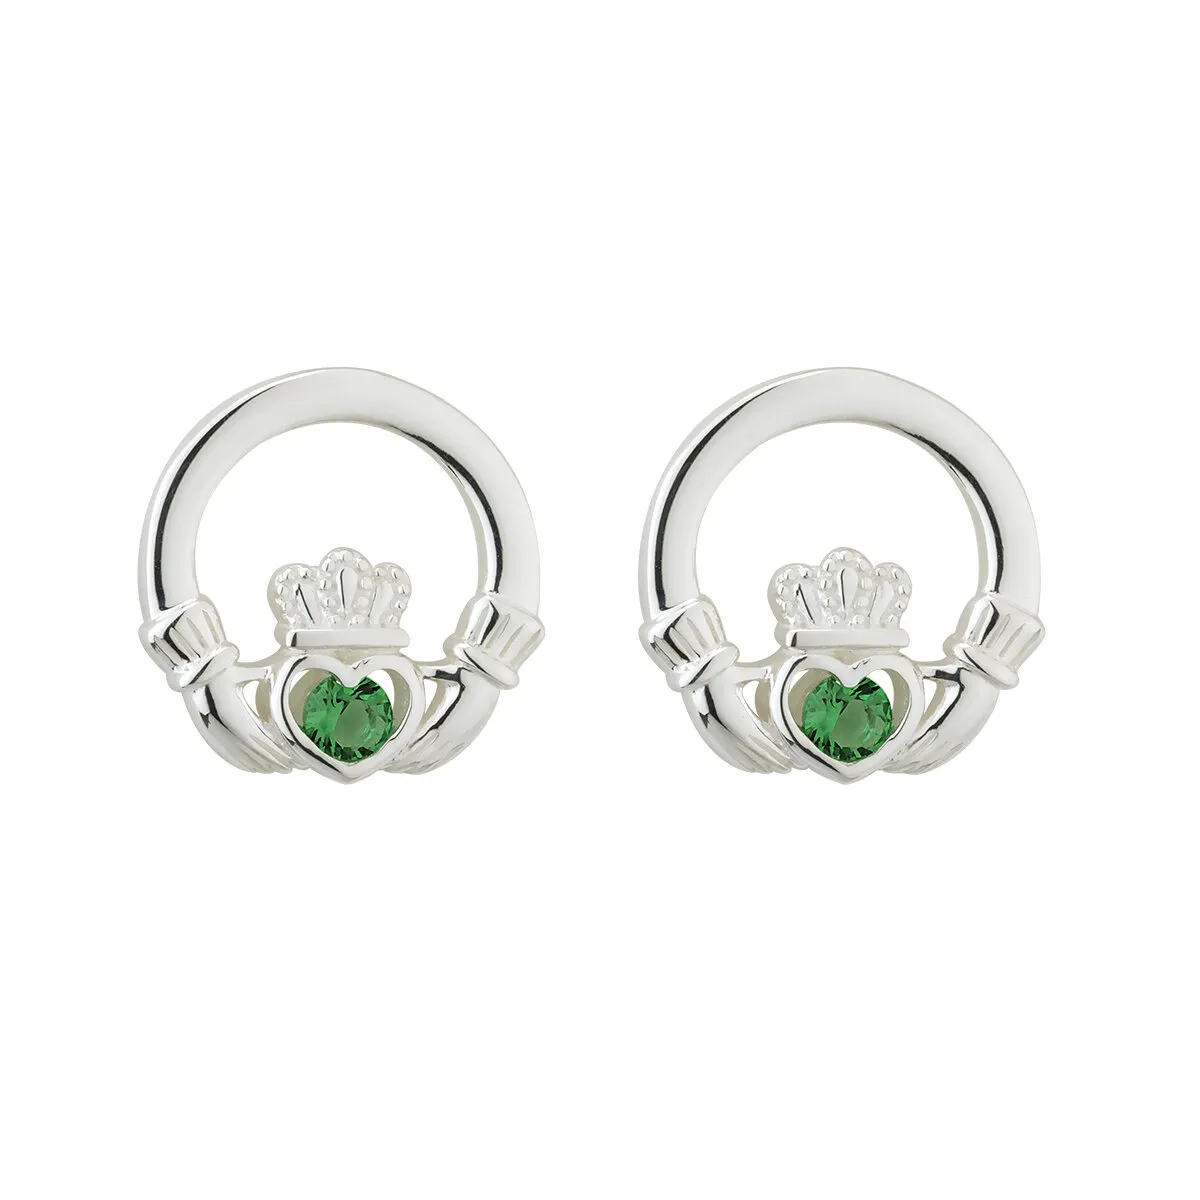 Sterling Silver Claddagh Stud Earrings With Green Crystal Centerpiece...